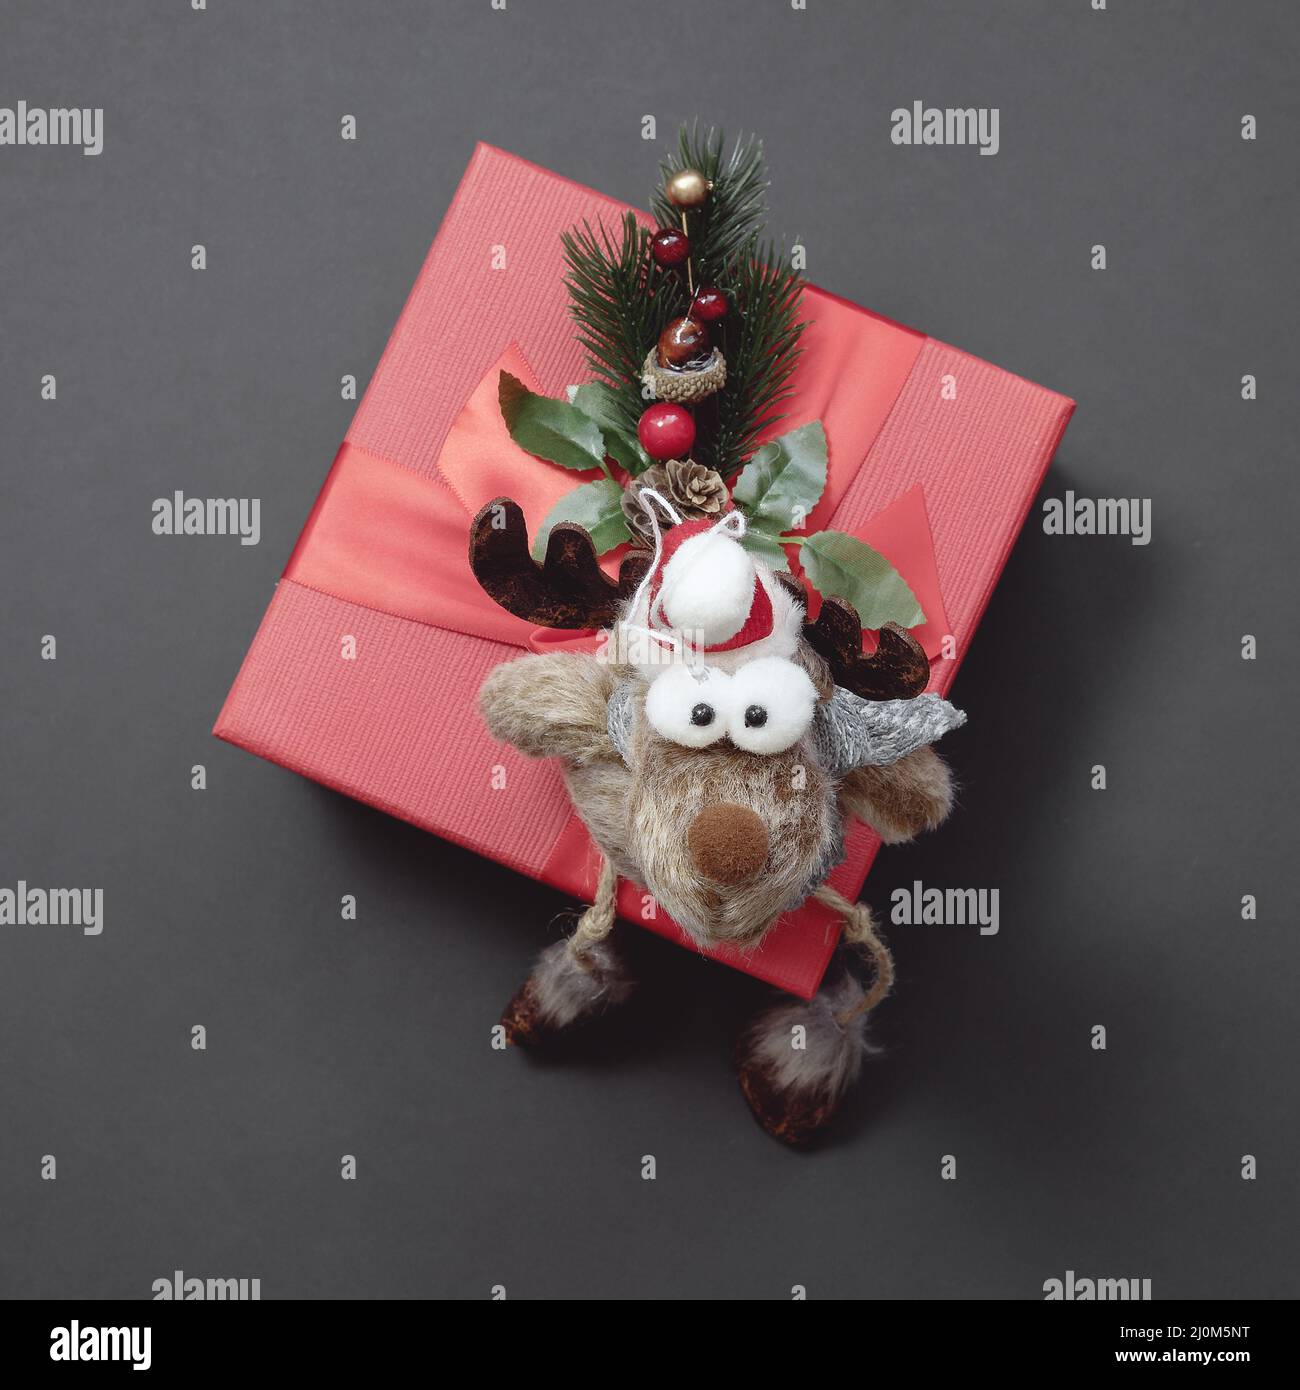 A funny soft toy deer sits on a red gift box decorated with a coniferous twig. Christmas composition Stock Photo